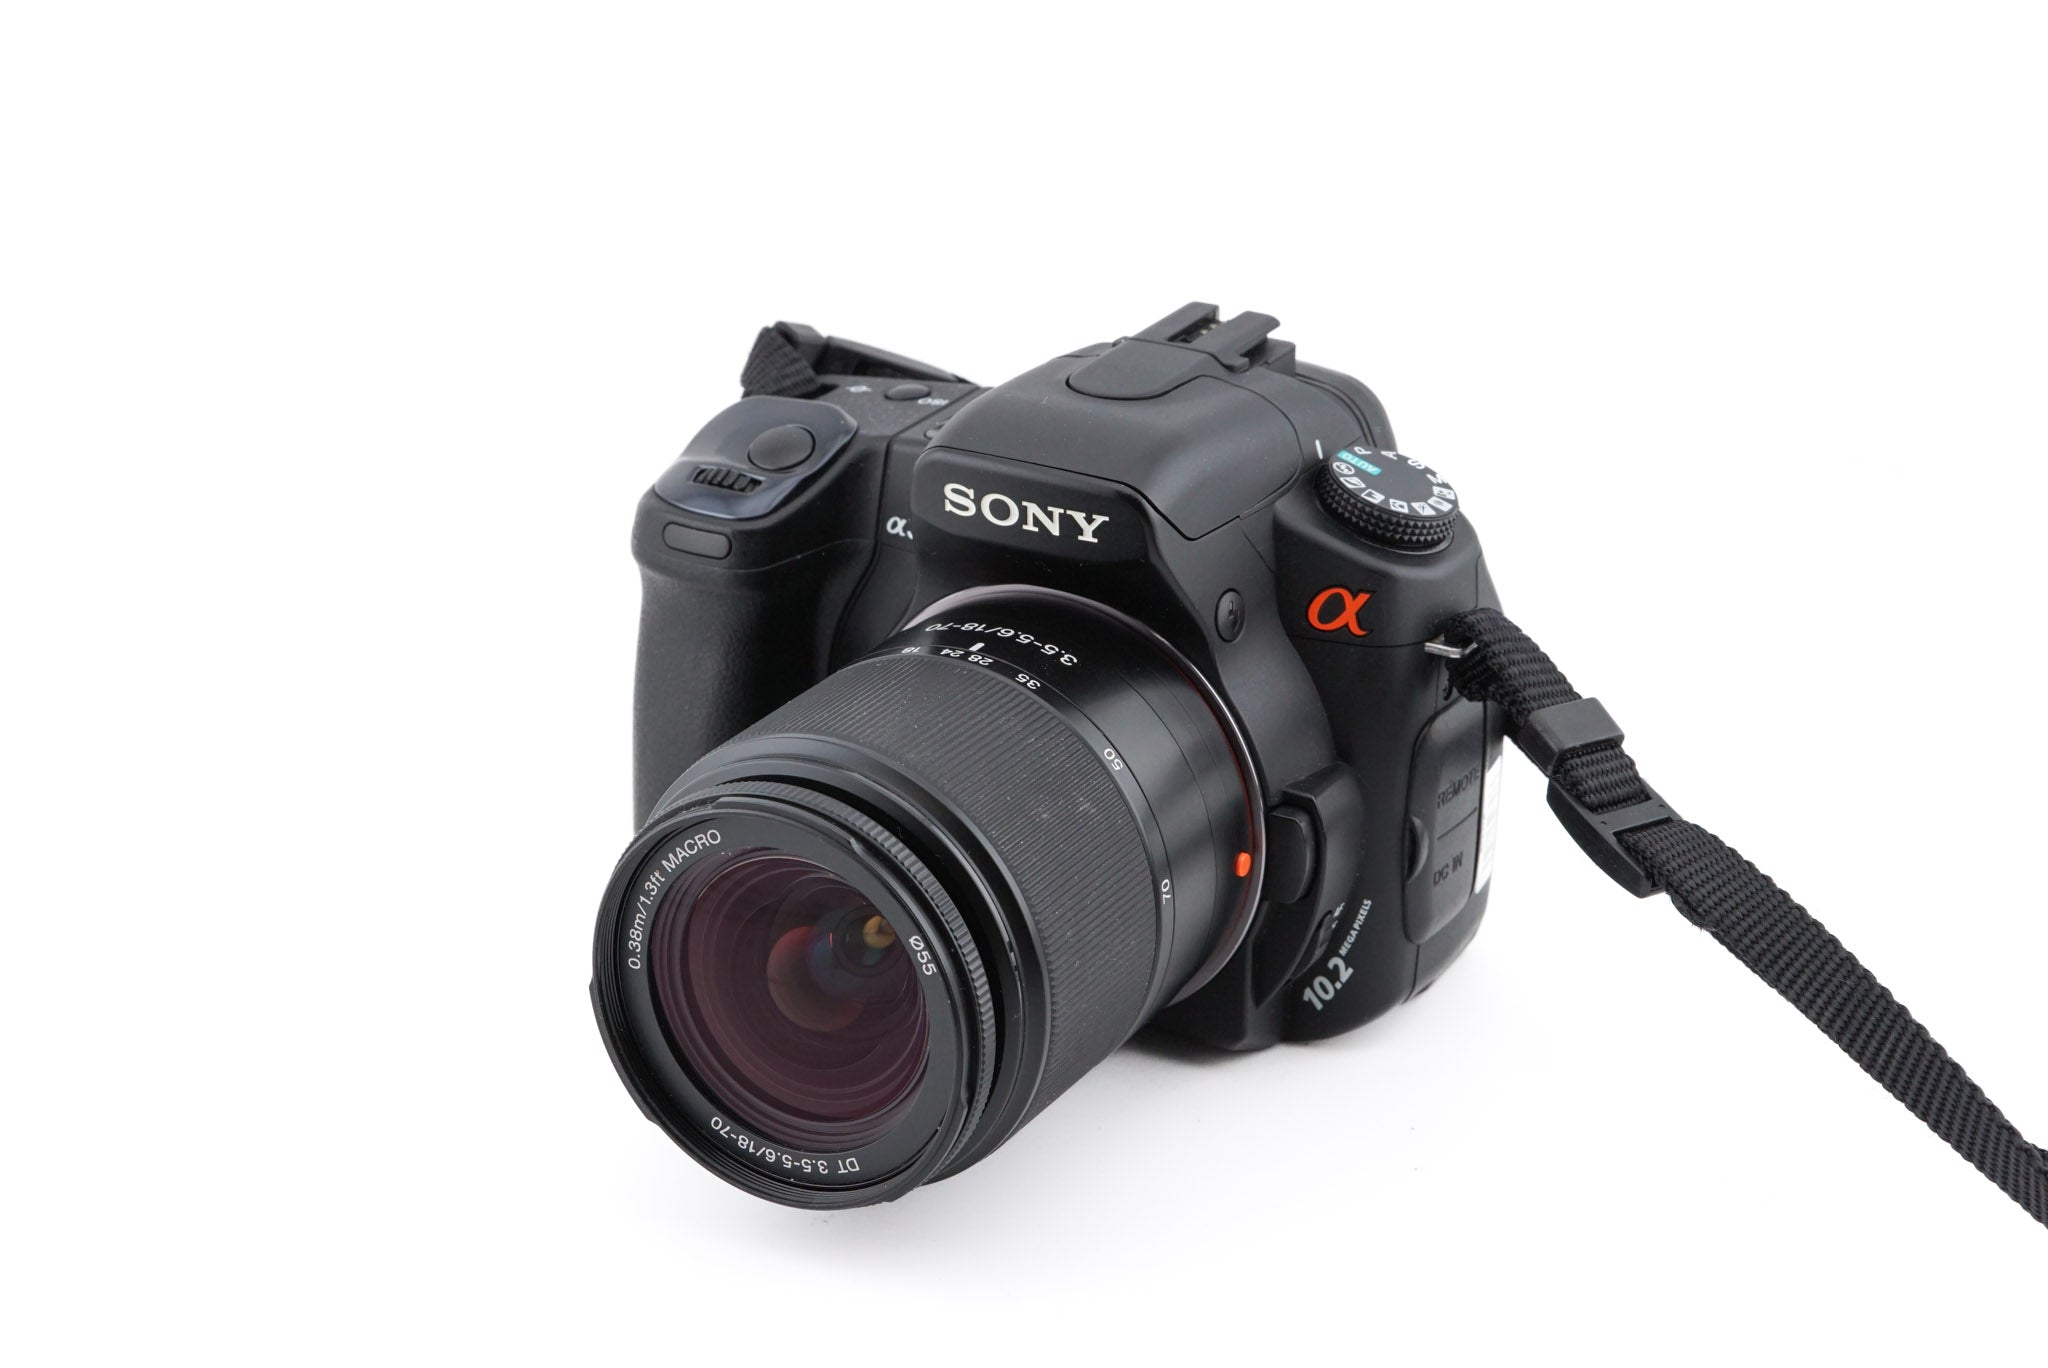 Sony Alpha A300 Review